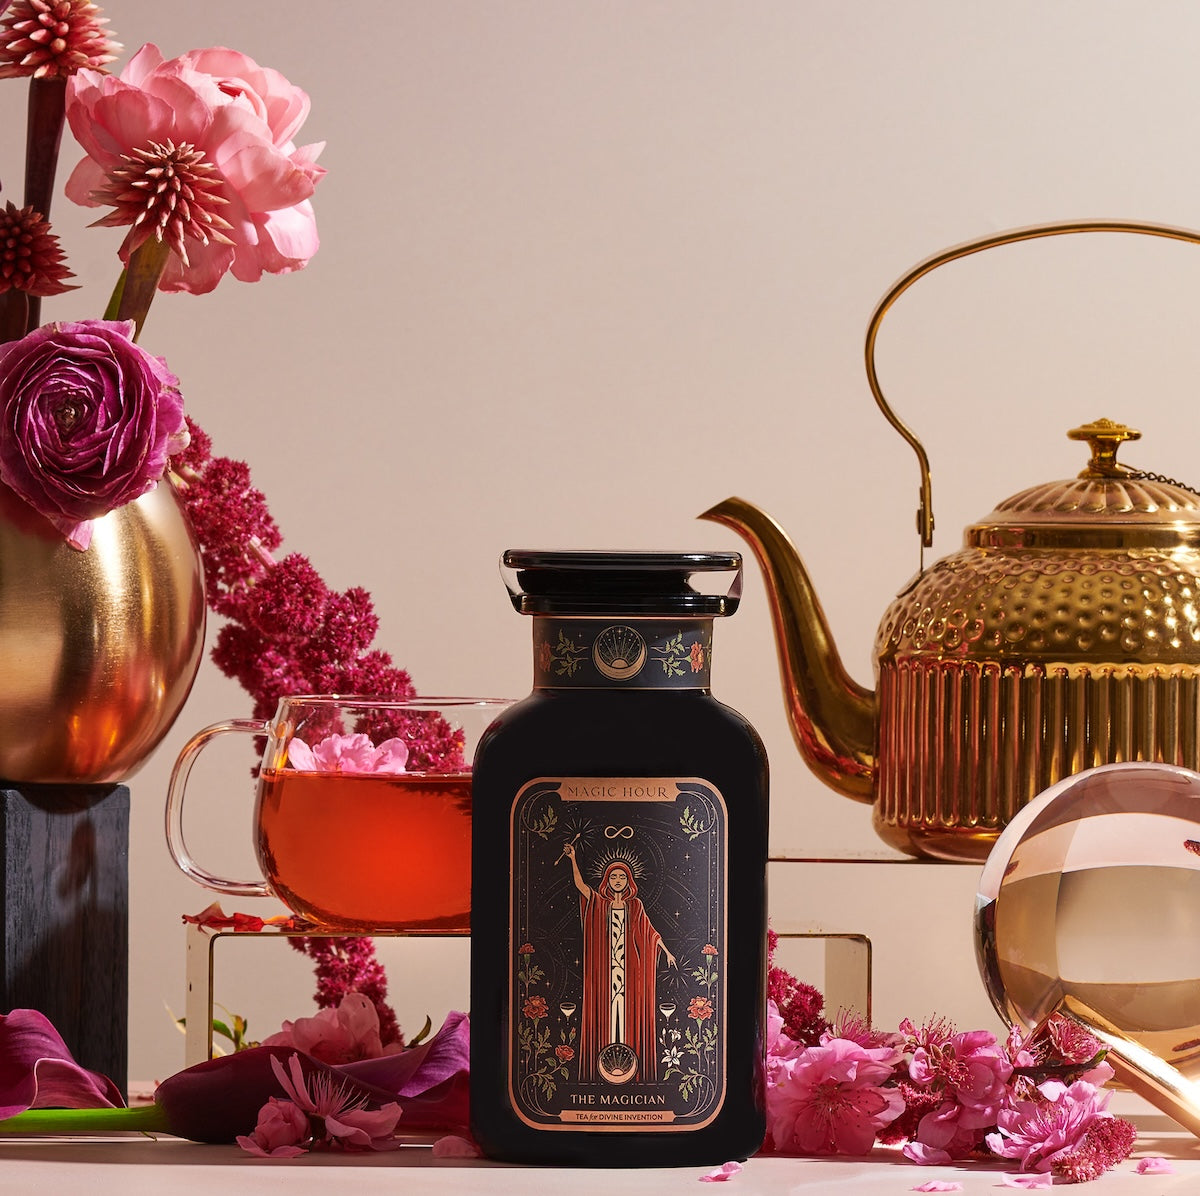 A black bottle labeled "The Magician," evoking transformative abilities, is surrounded by pink flowers, a glass cup of tea, a golden teapot, and a glass orb. The background features more pink flowers and a light-colored backdrop, creating a luxurious and elegant setting with wellness benefits.